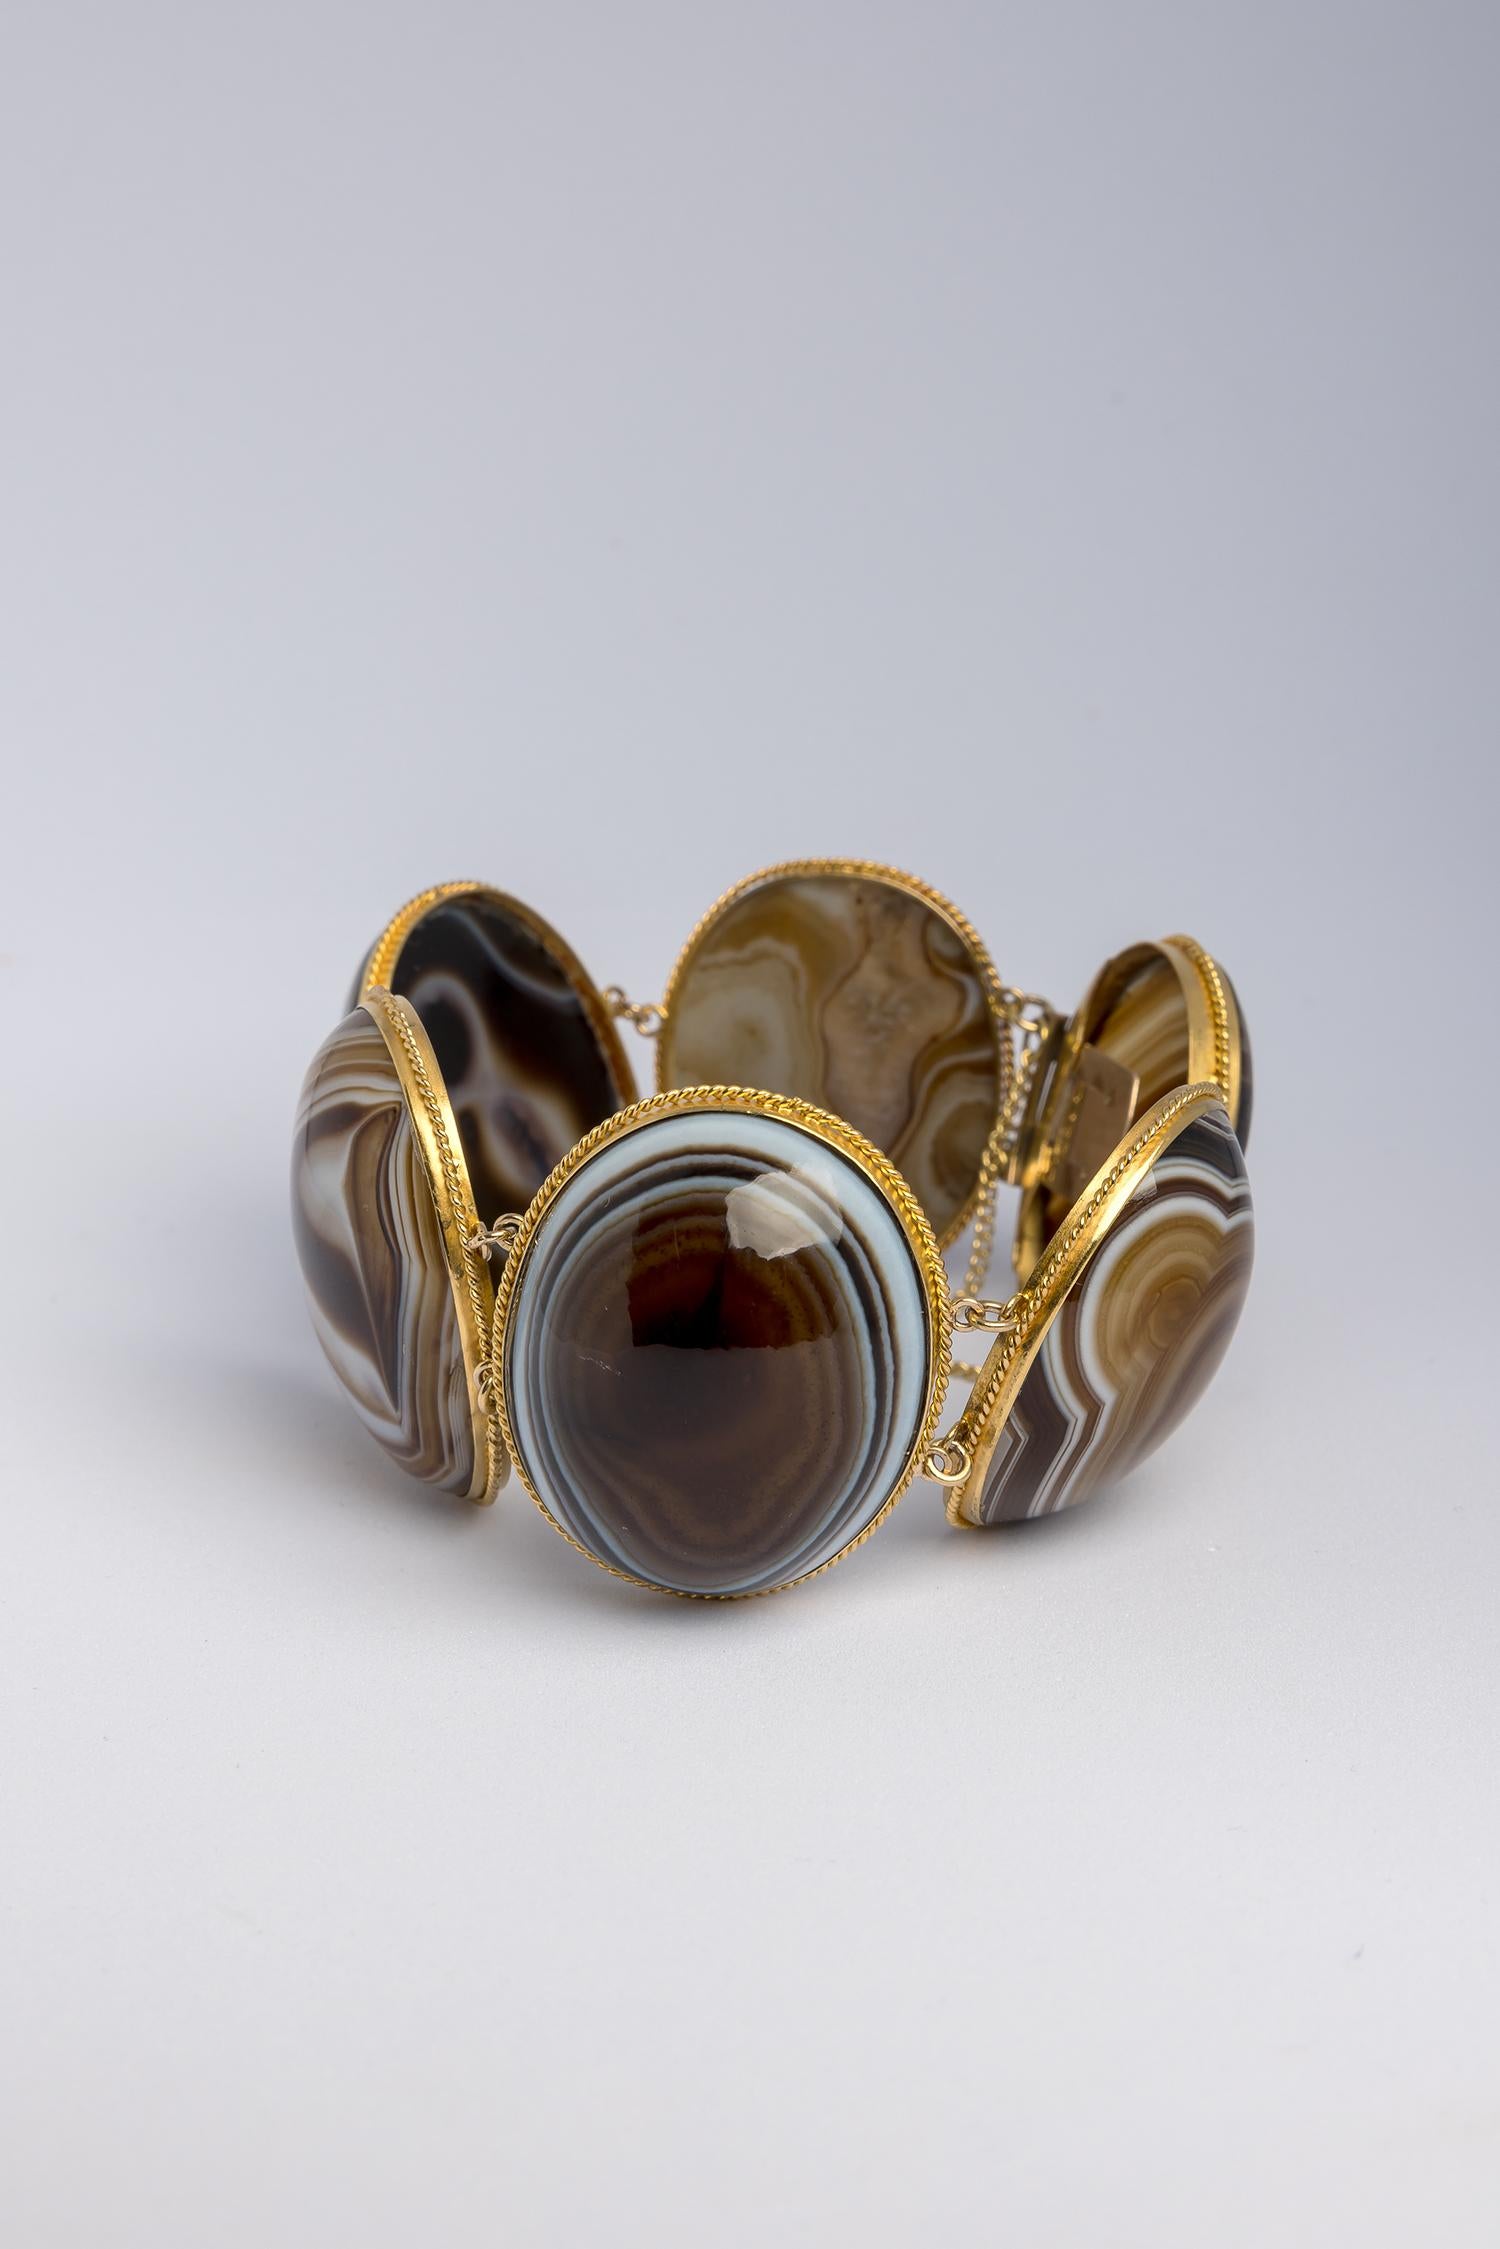 Dramatic victorian grand tour banded agate bracelet. 

Made as Grand Tour souvenir, still highly sought after today.

This 19th century bracelet features superbly crafted specimen oval cabochon stones, highlighting the varying layers, dynamically